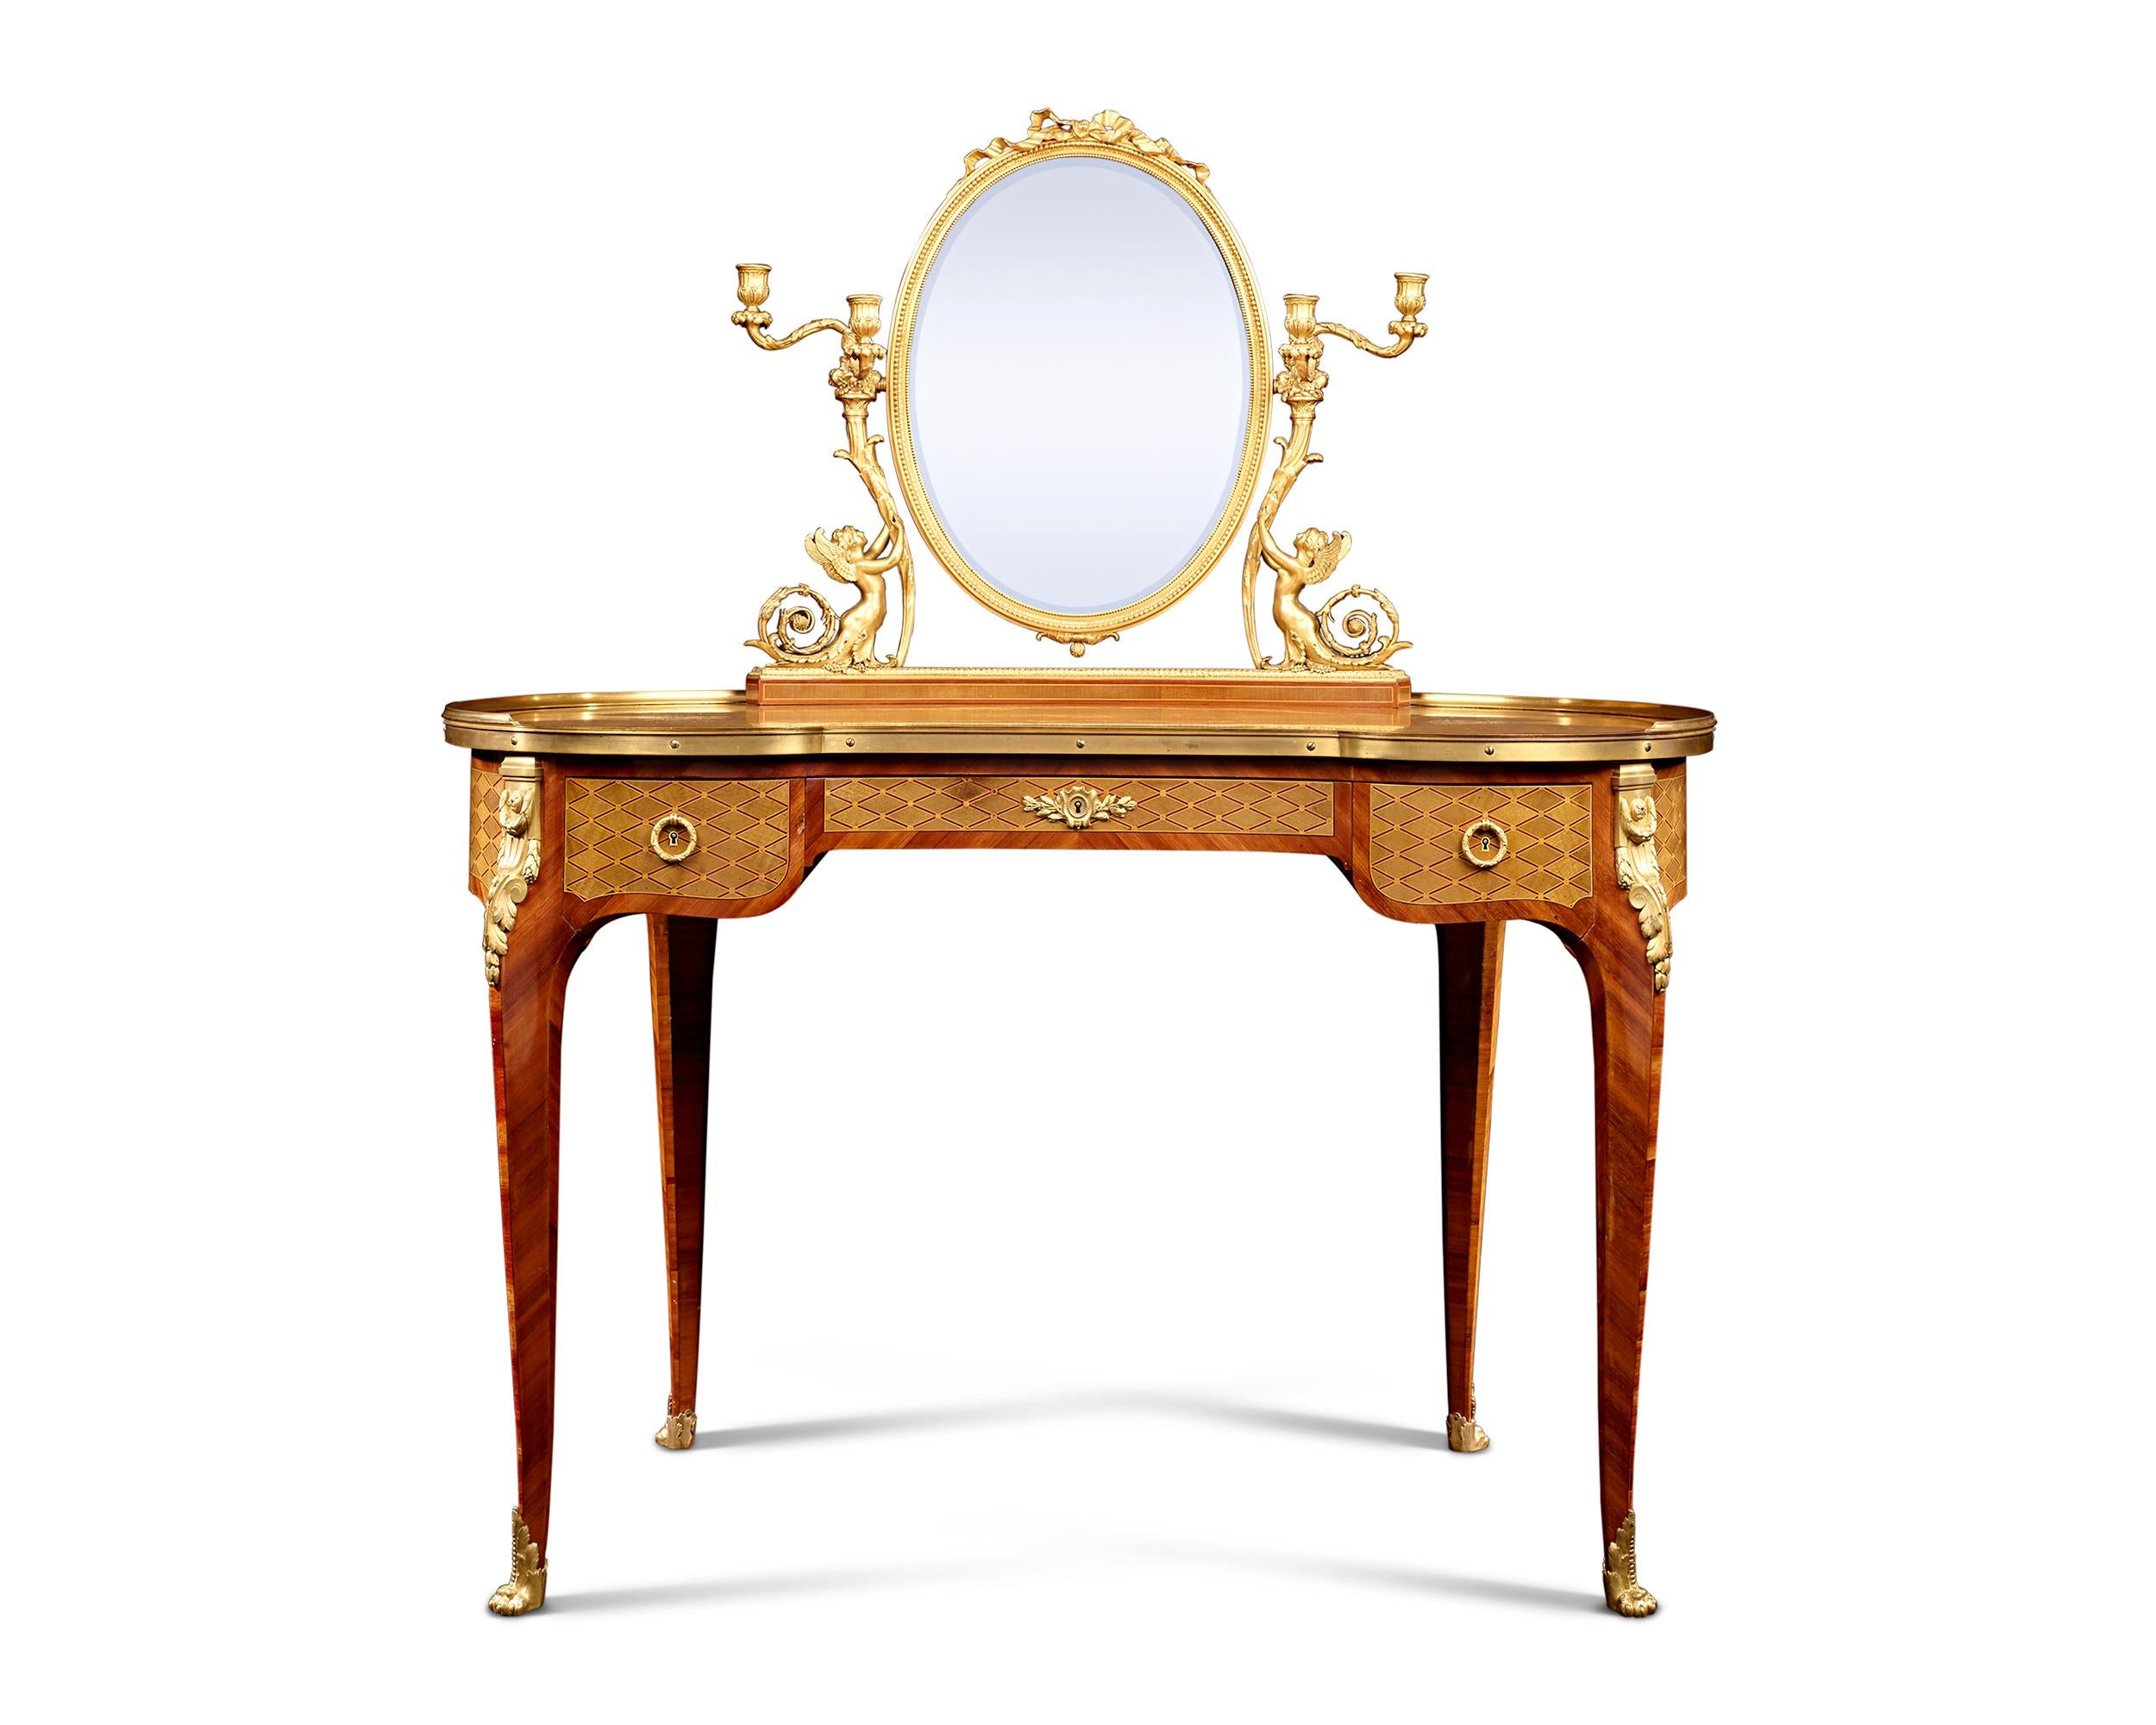 Eloquent marquetry and faithful interpretation of the Louis XVI taste characterize this beautiful 19th century dressing table by Paul Sormani. A graceful oval-shaped vanity mirror tops this impeccable design, ornamented with an ormolu framework of